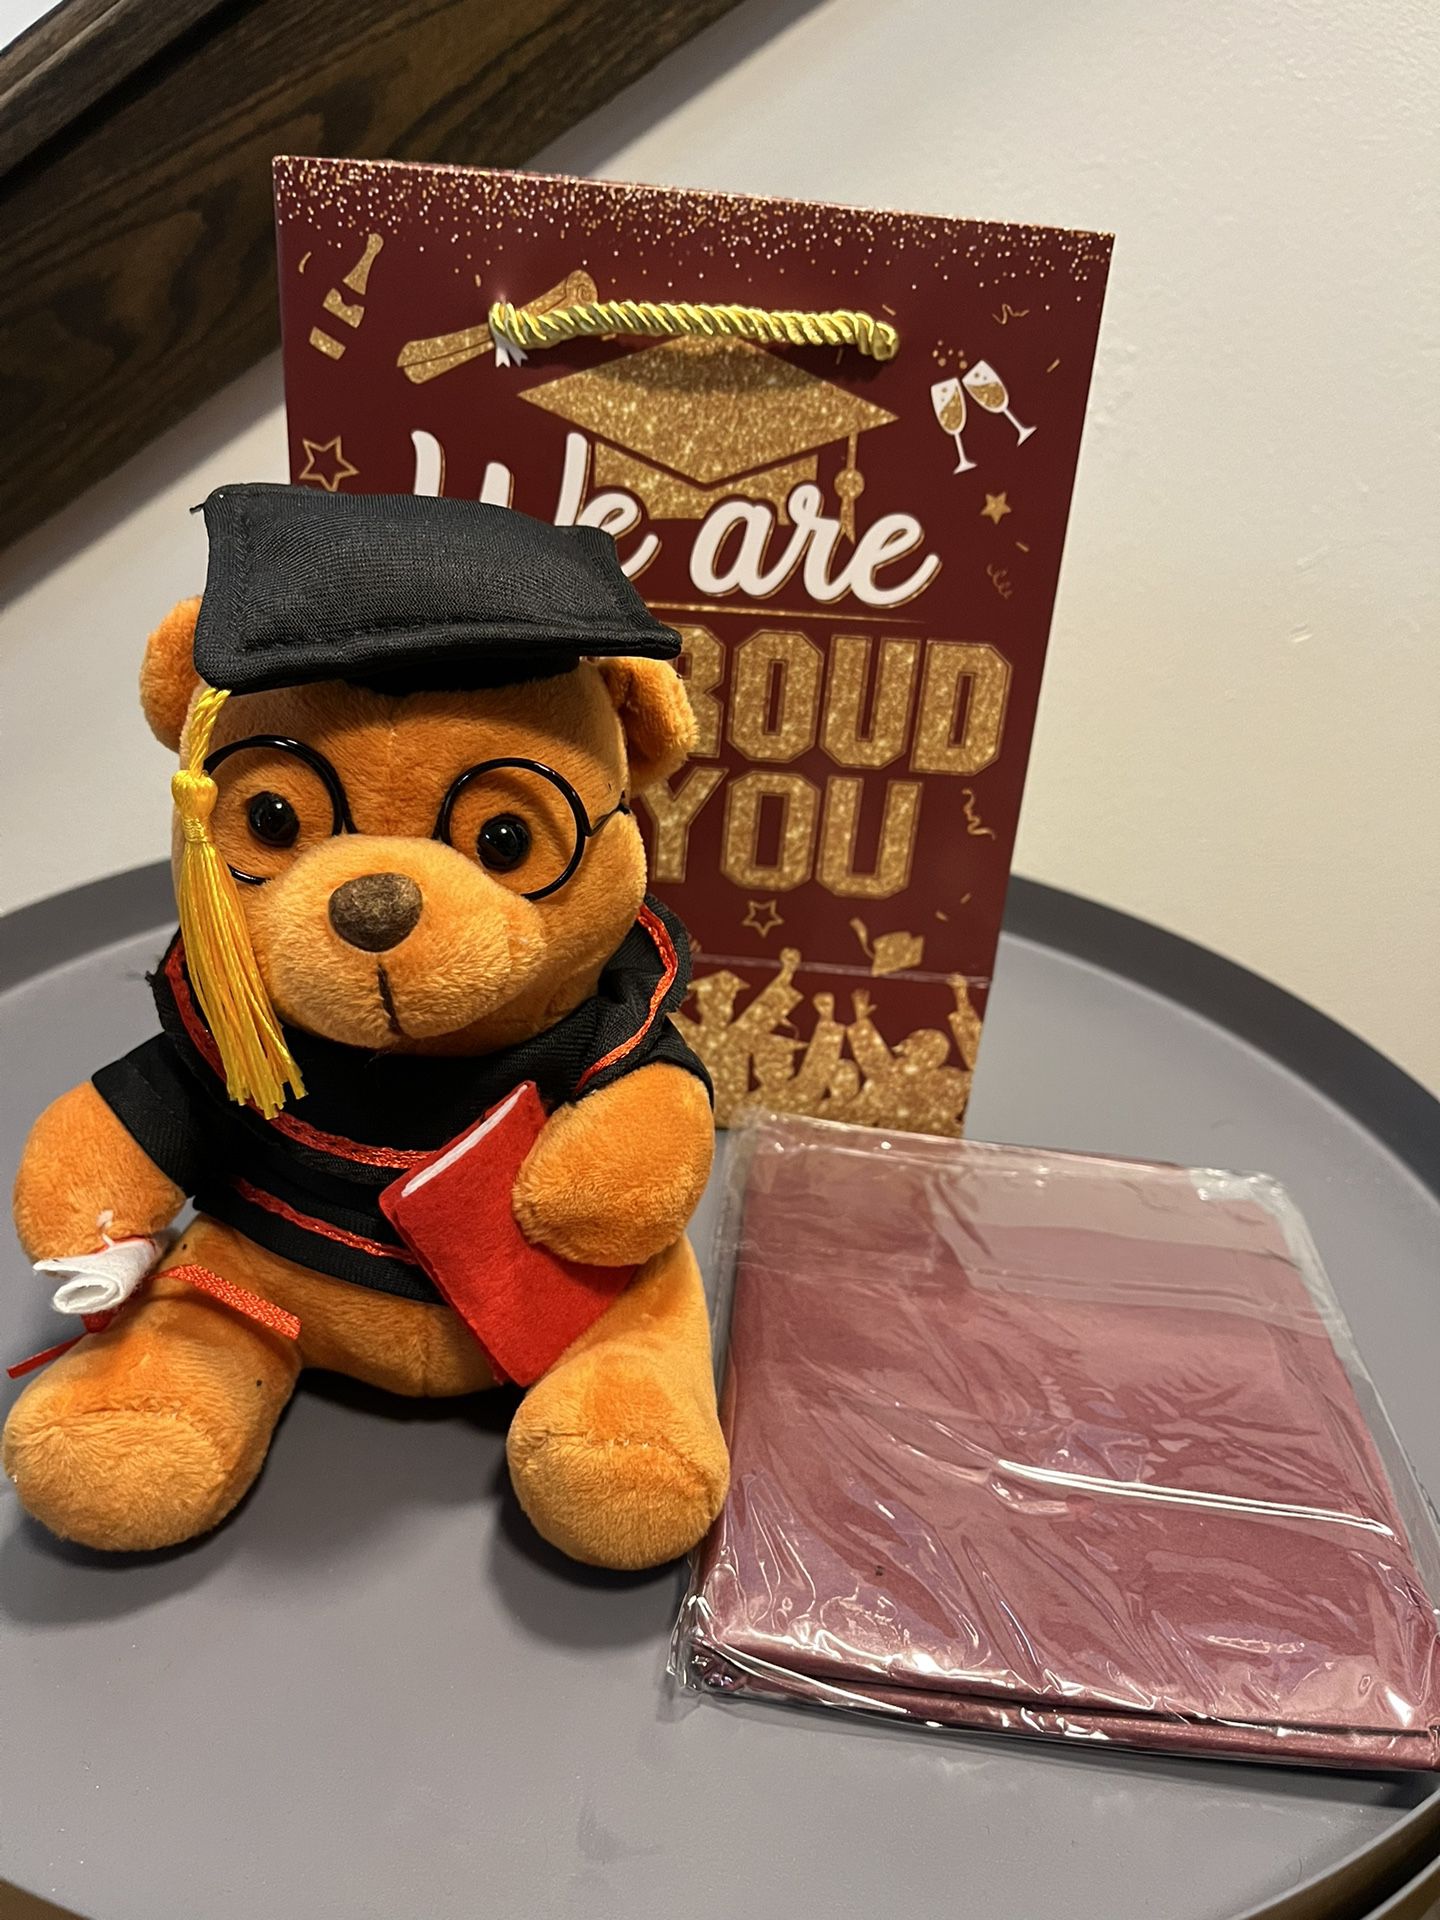 New Graduation Teddy bear With Gift Bag And Tissue Choose Color  $10 Each 